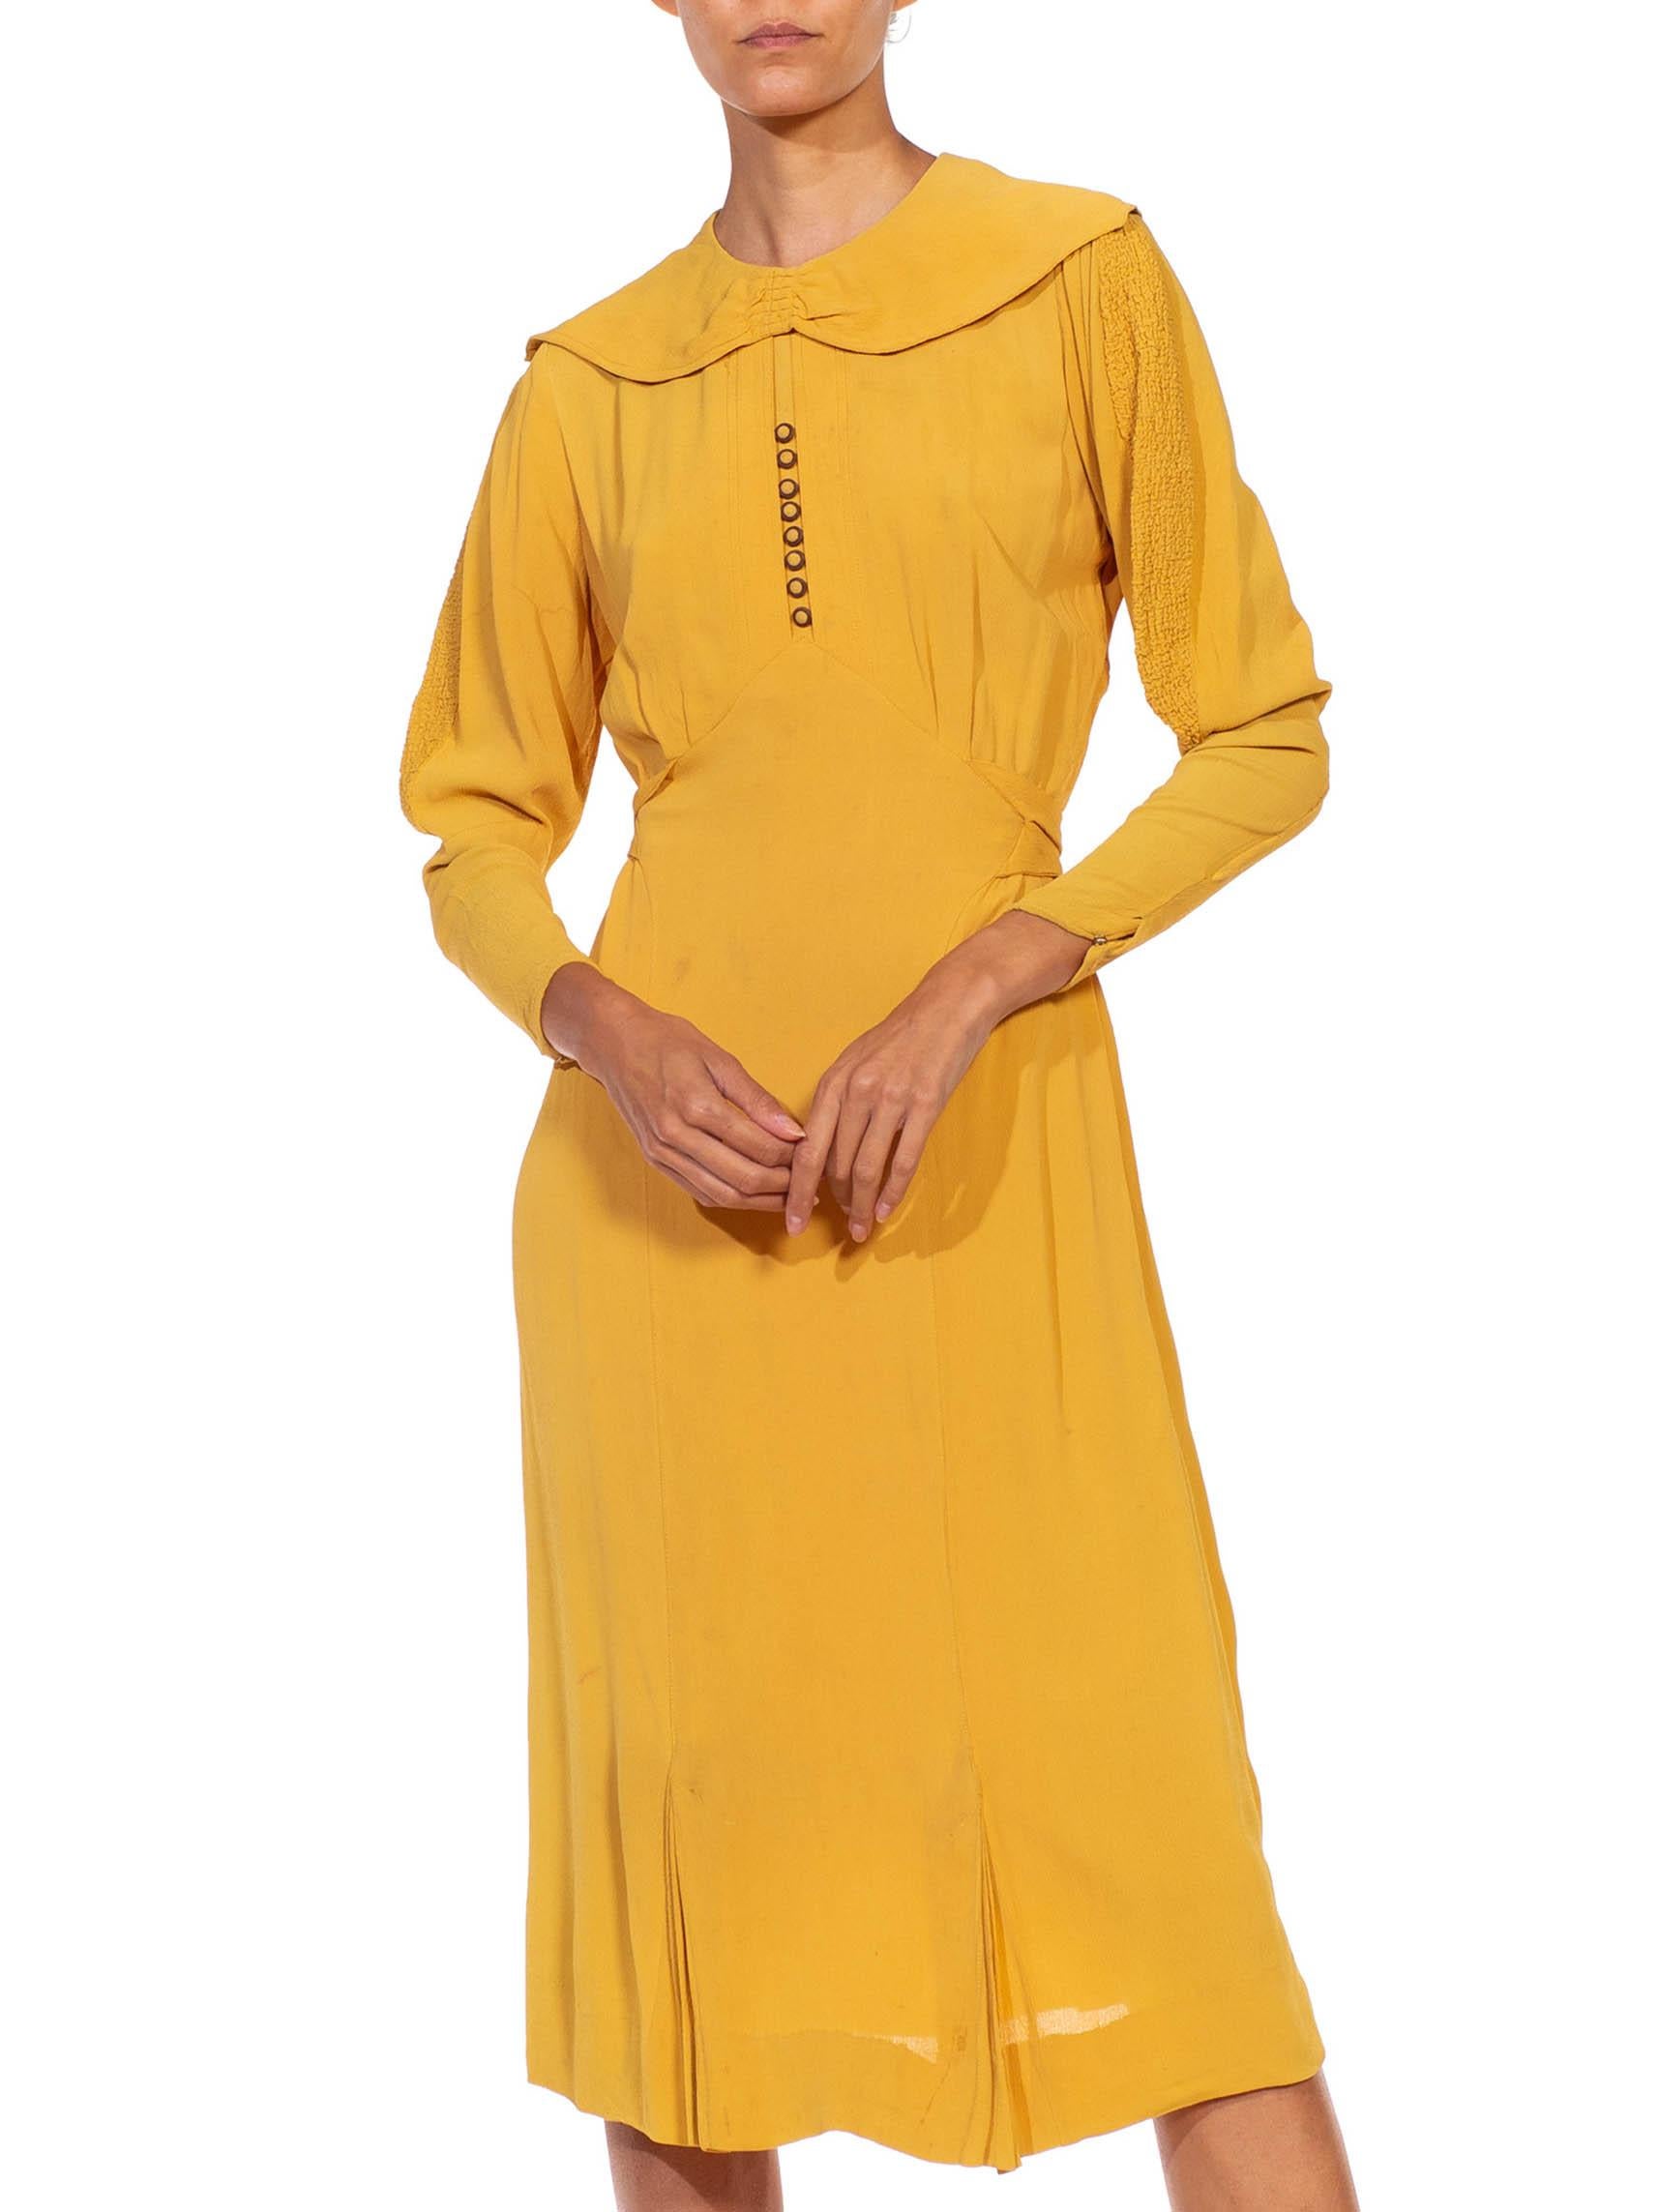 dress with leg of mutton sleeves